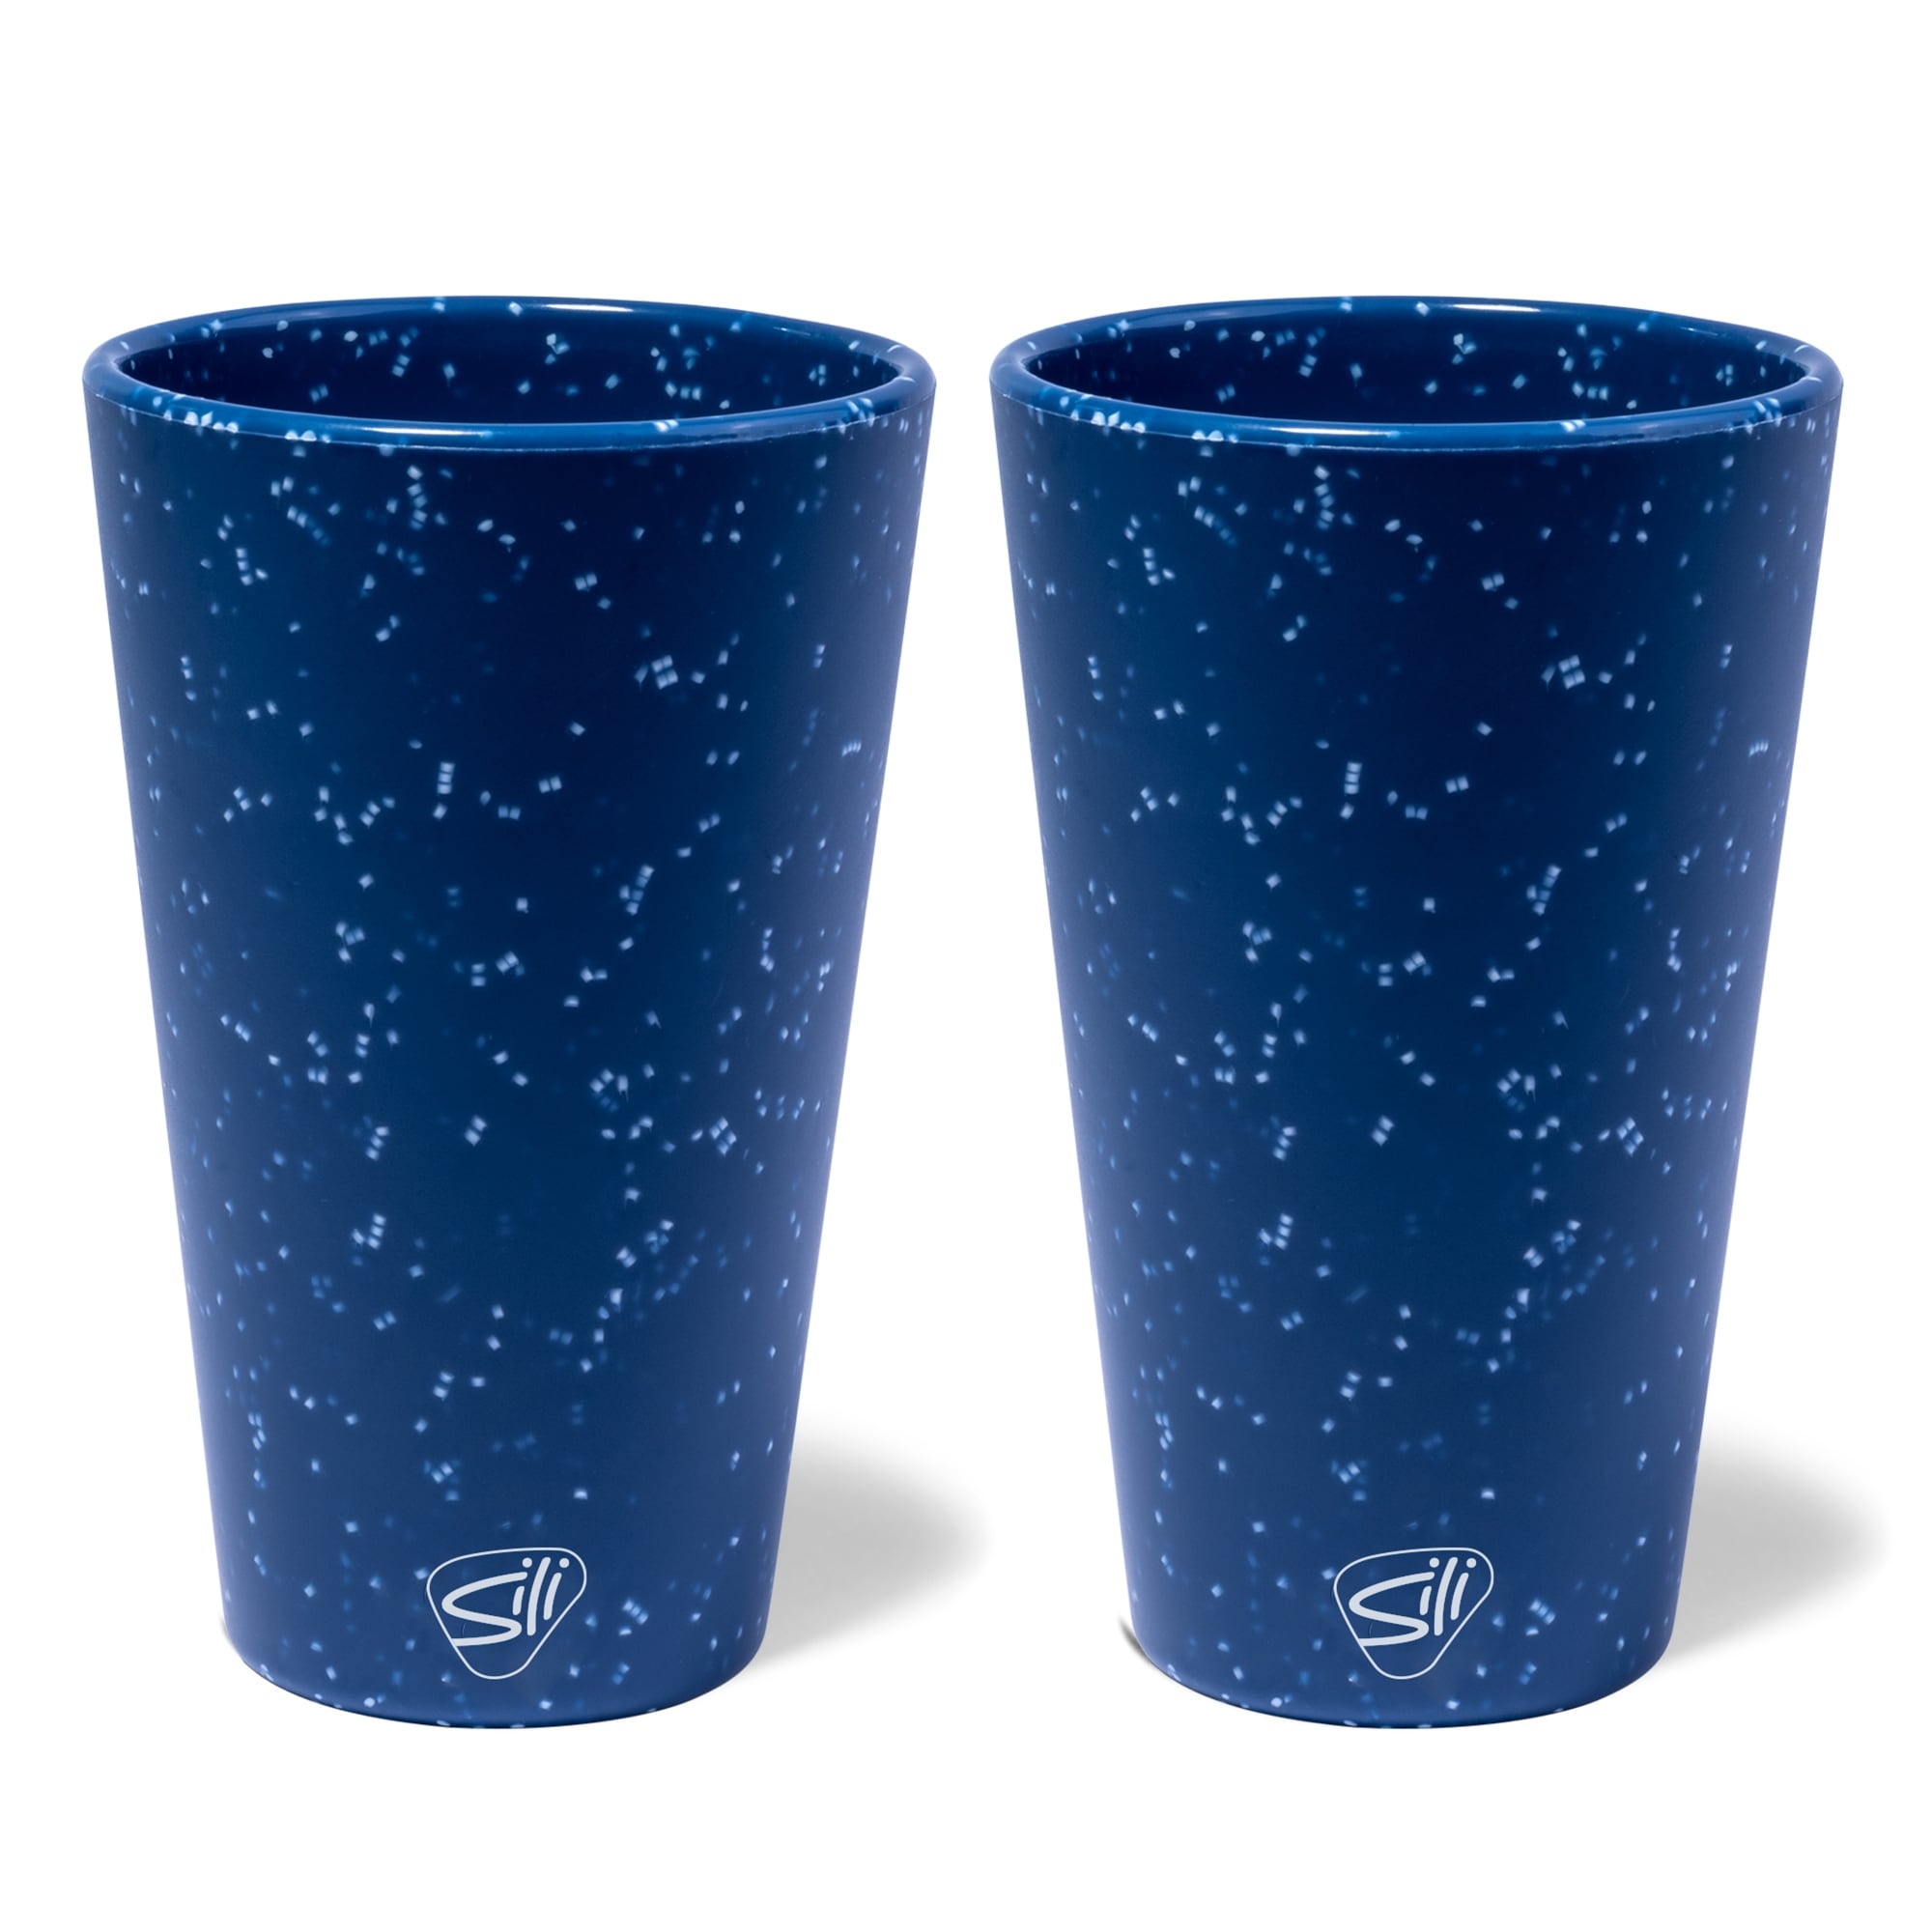 Silipint: Silicone Pint Glasses: 2 Pack Speckled Blue - 16oz Unbreakable  Cups, Flexible, Hot/Cold, Non-Slip Easy Grip - Bed Bath & Beyond - 37365616